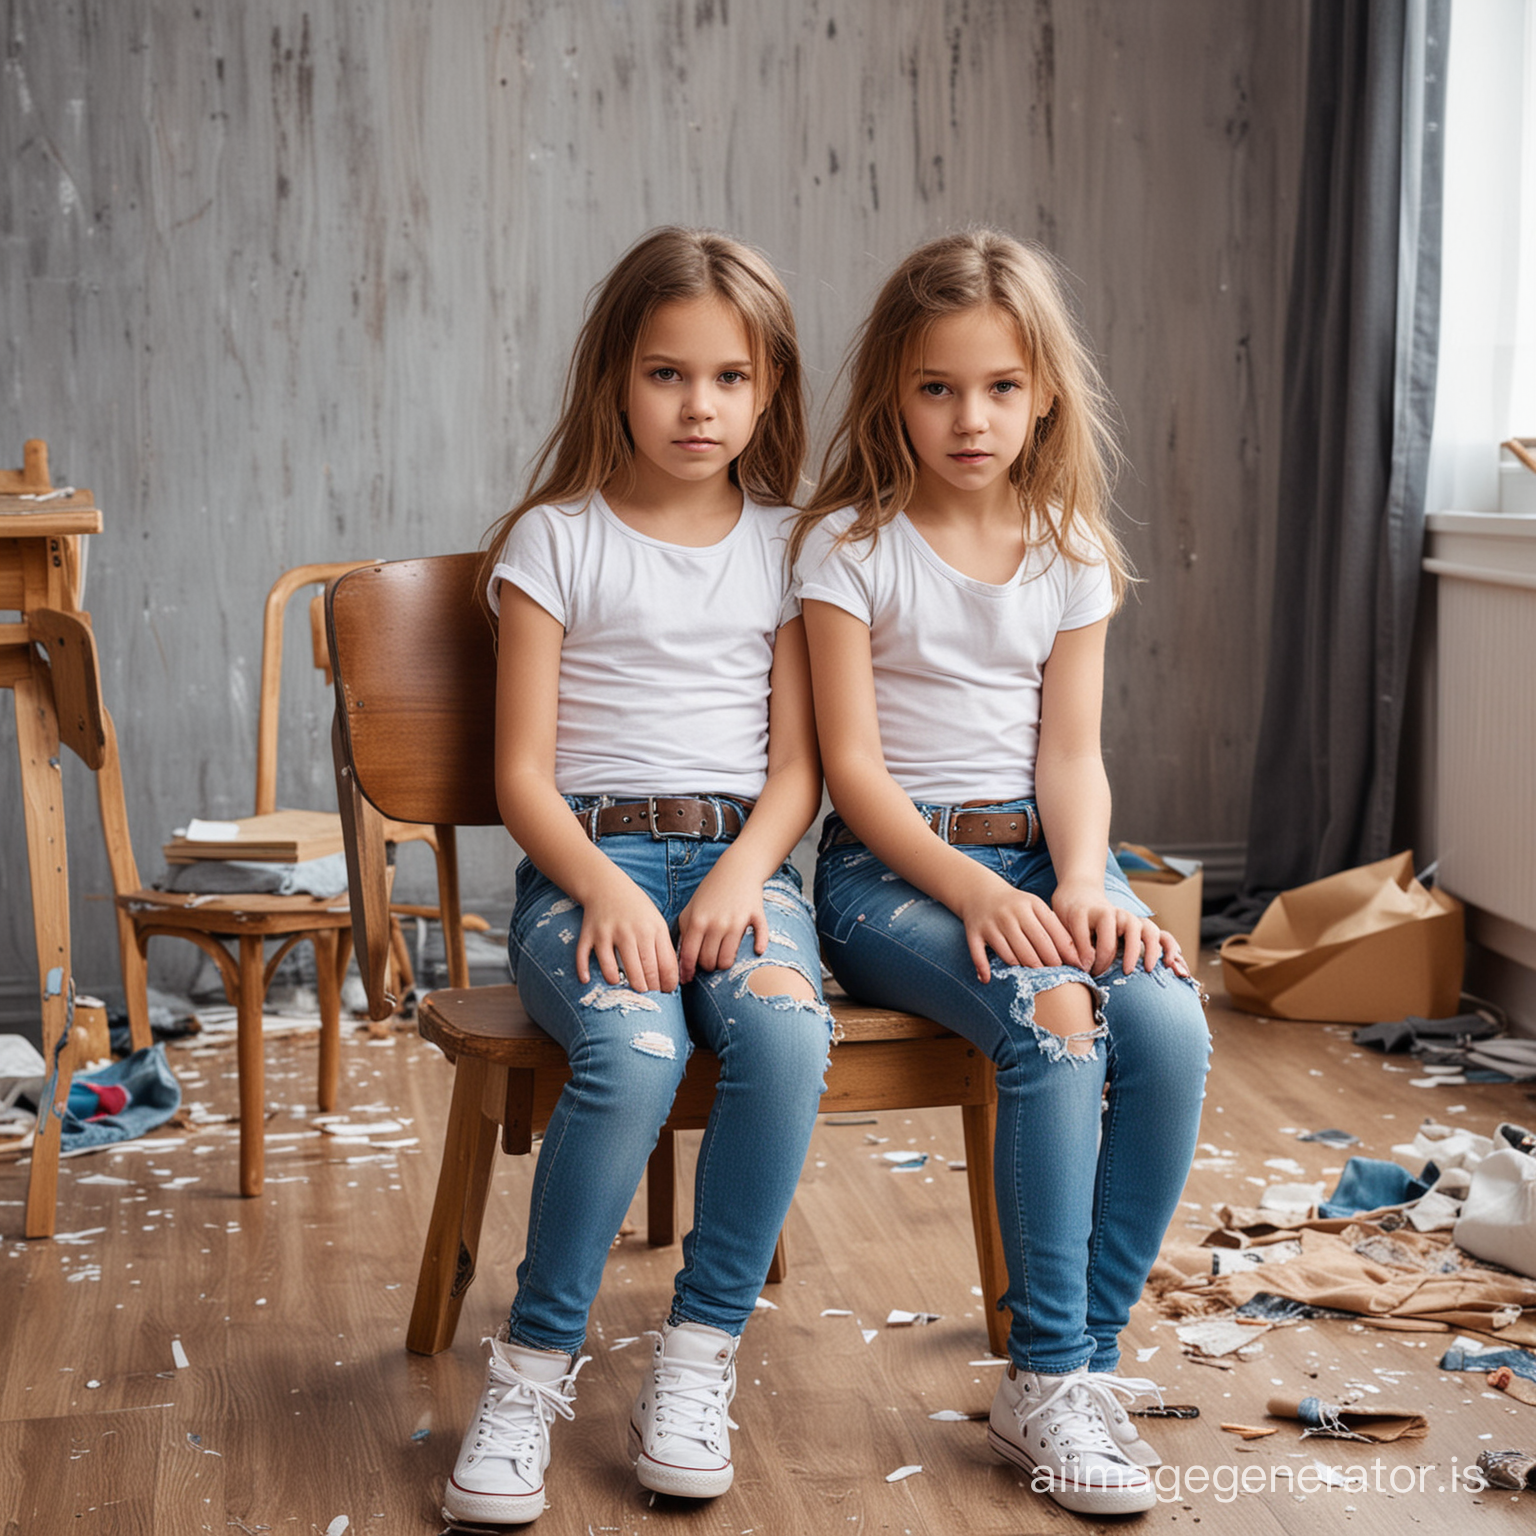 photo of two girls,13years,ripped tight jeans with belt,stern face,sitting on a chair in a messy children's room